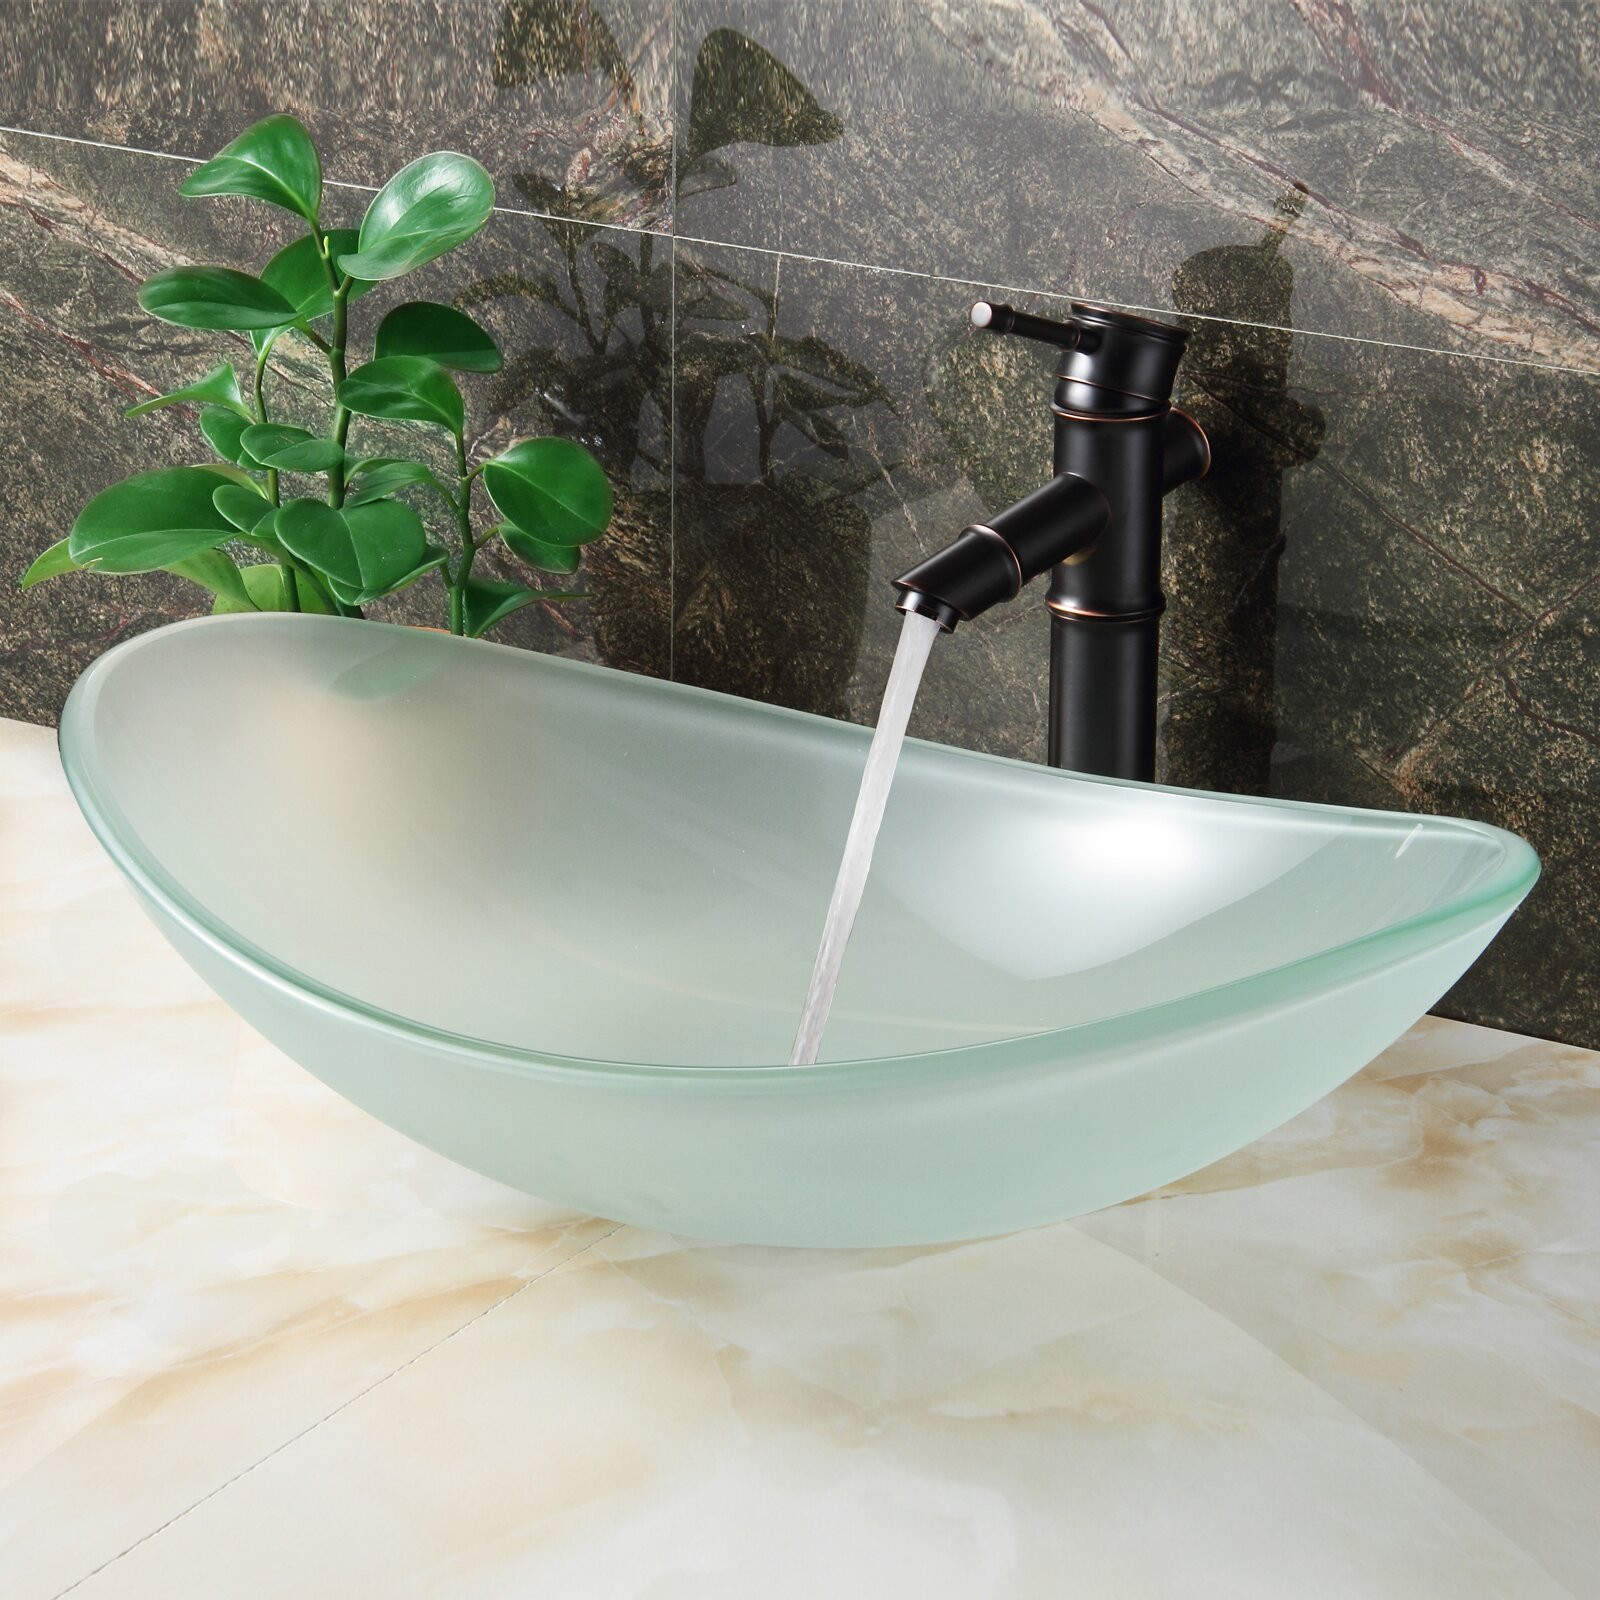 Sink Bowls For Bathroom
 Elite Double Layered Tempered Glass Boat Shaped Bowl